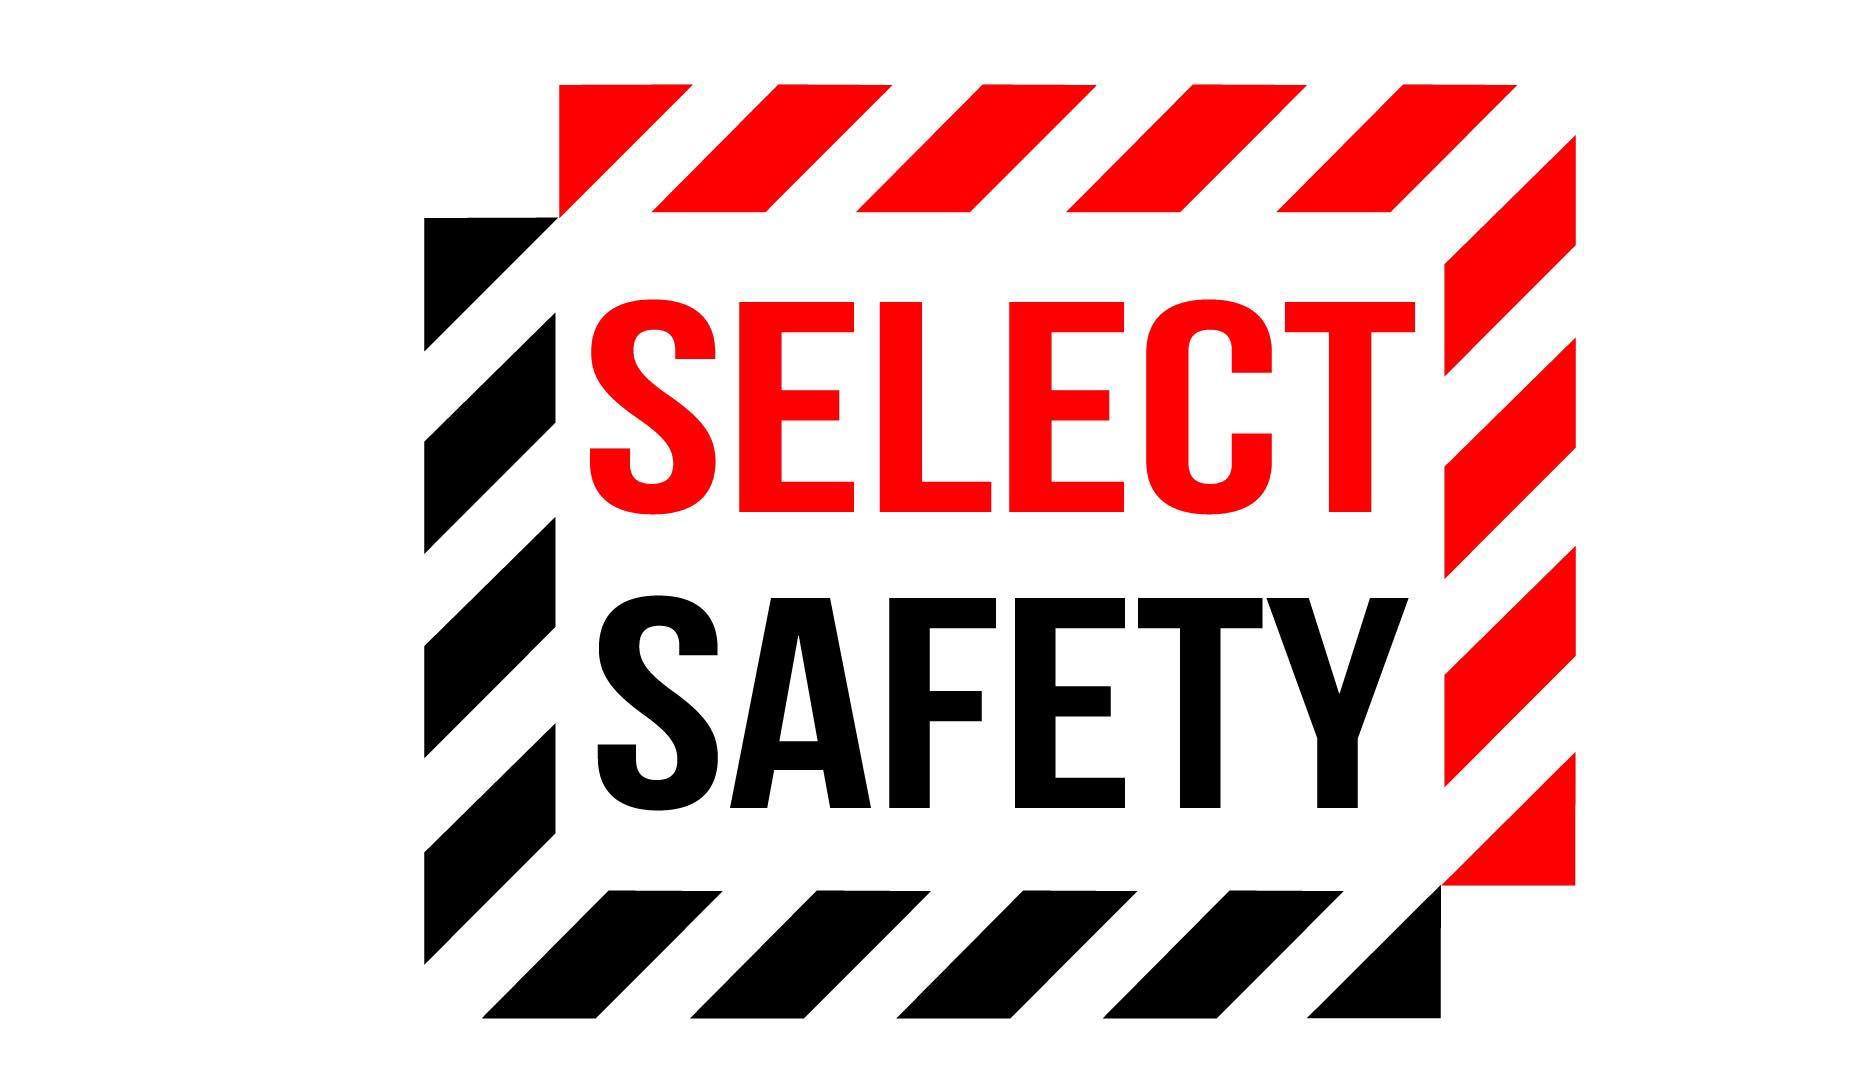 Select safety